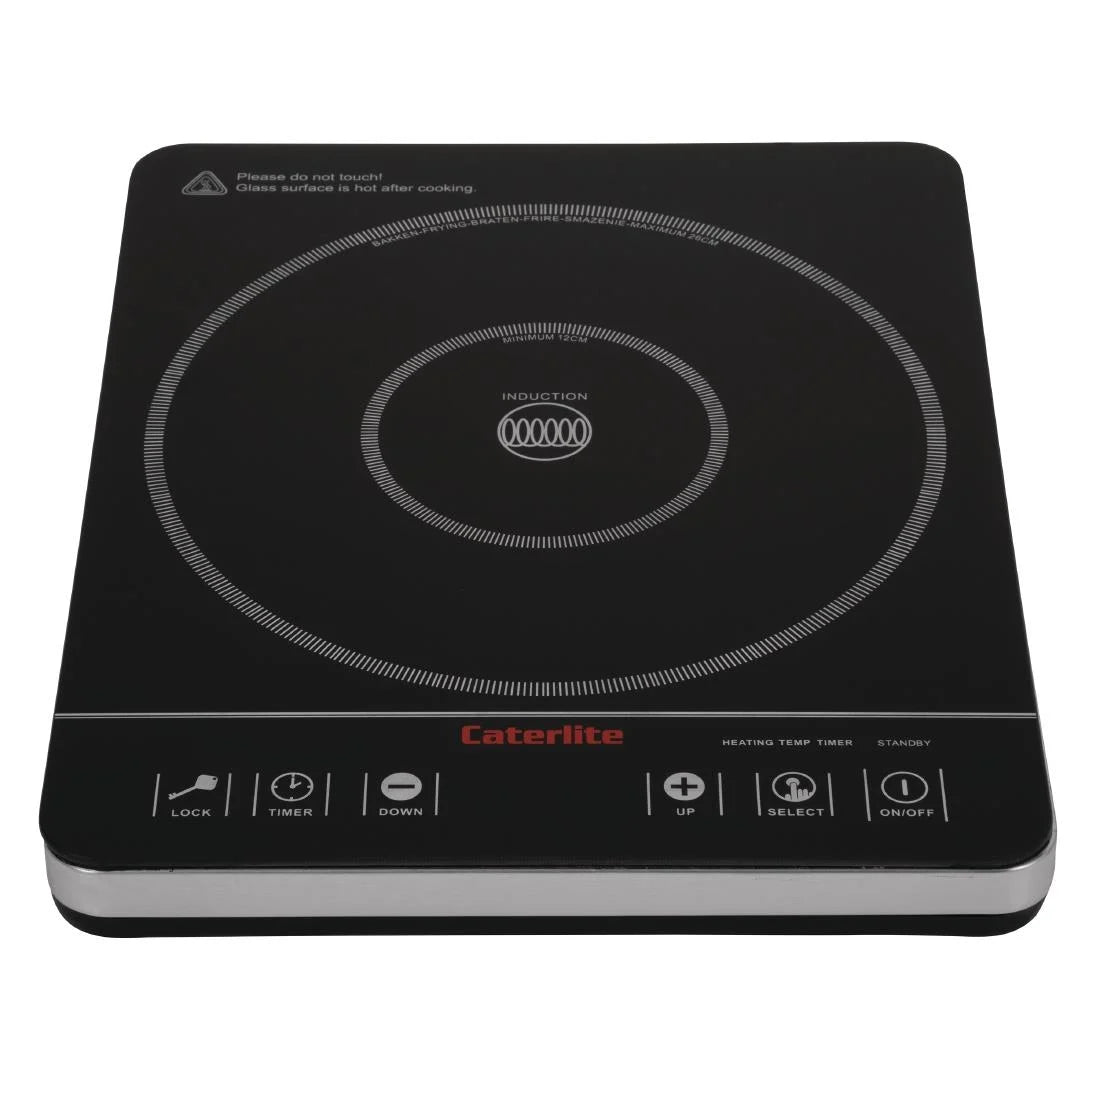 Caterlite Induction Hob 2000W.Product Ref:00709.Model:CM352. 🚚 3-5 Days Delivery